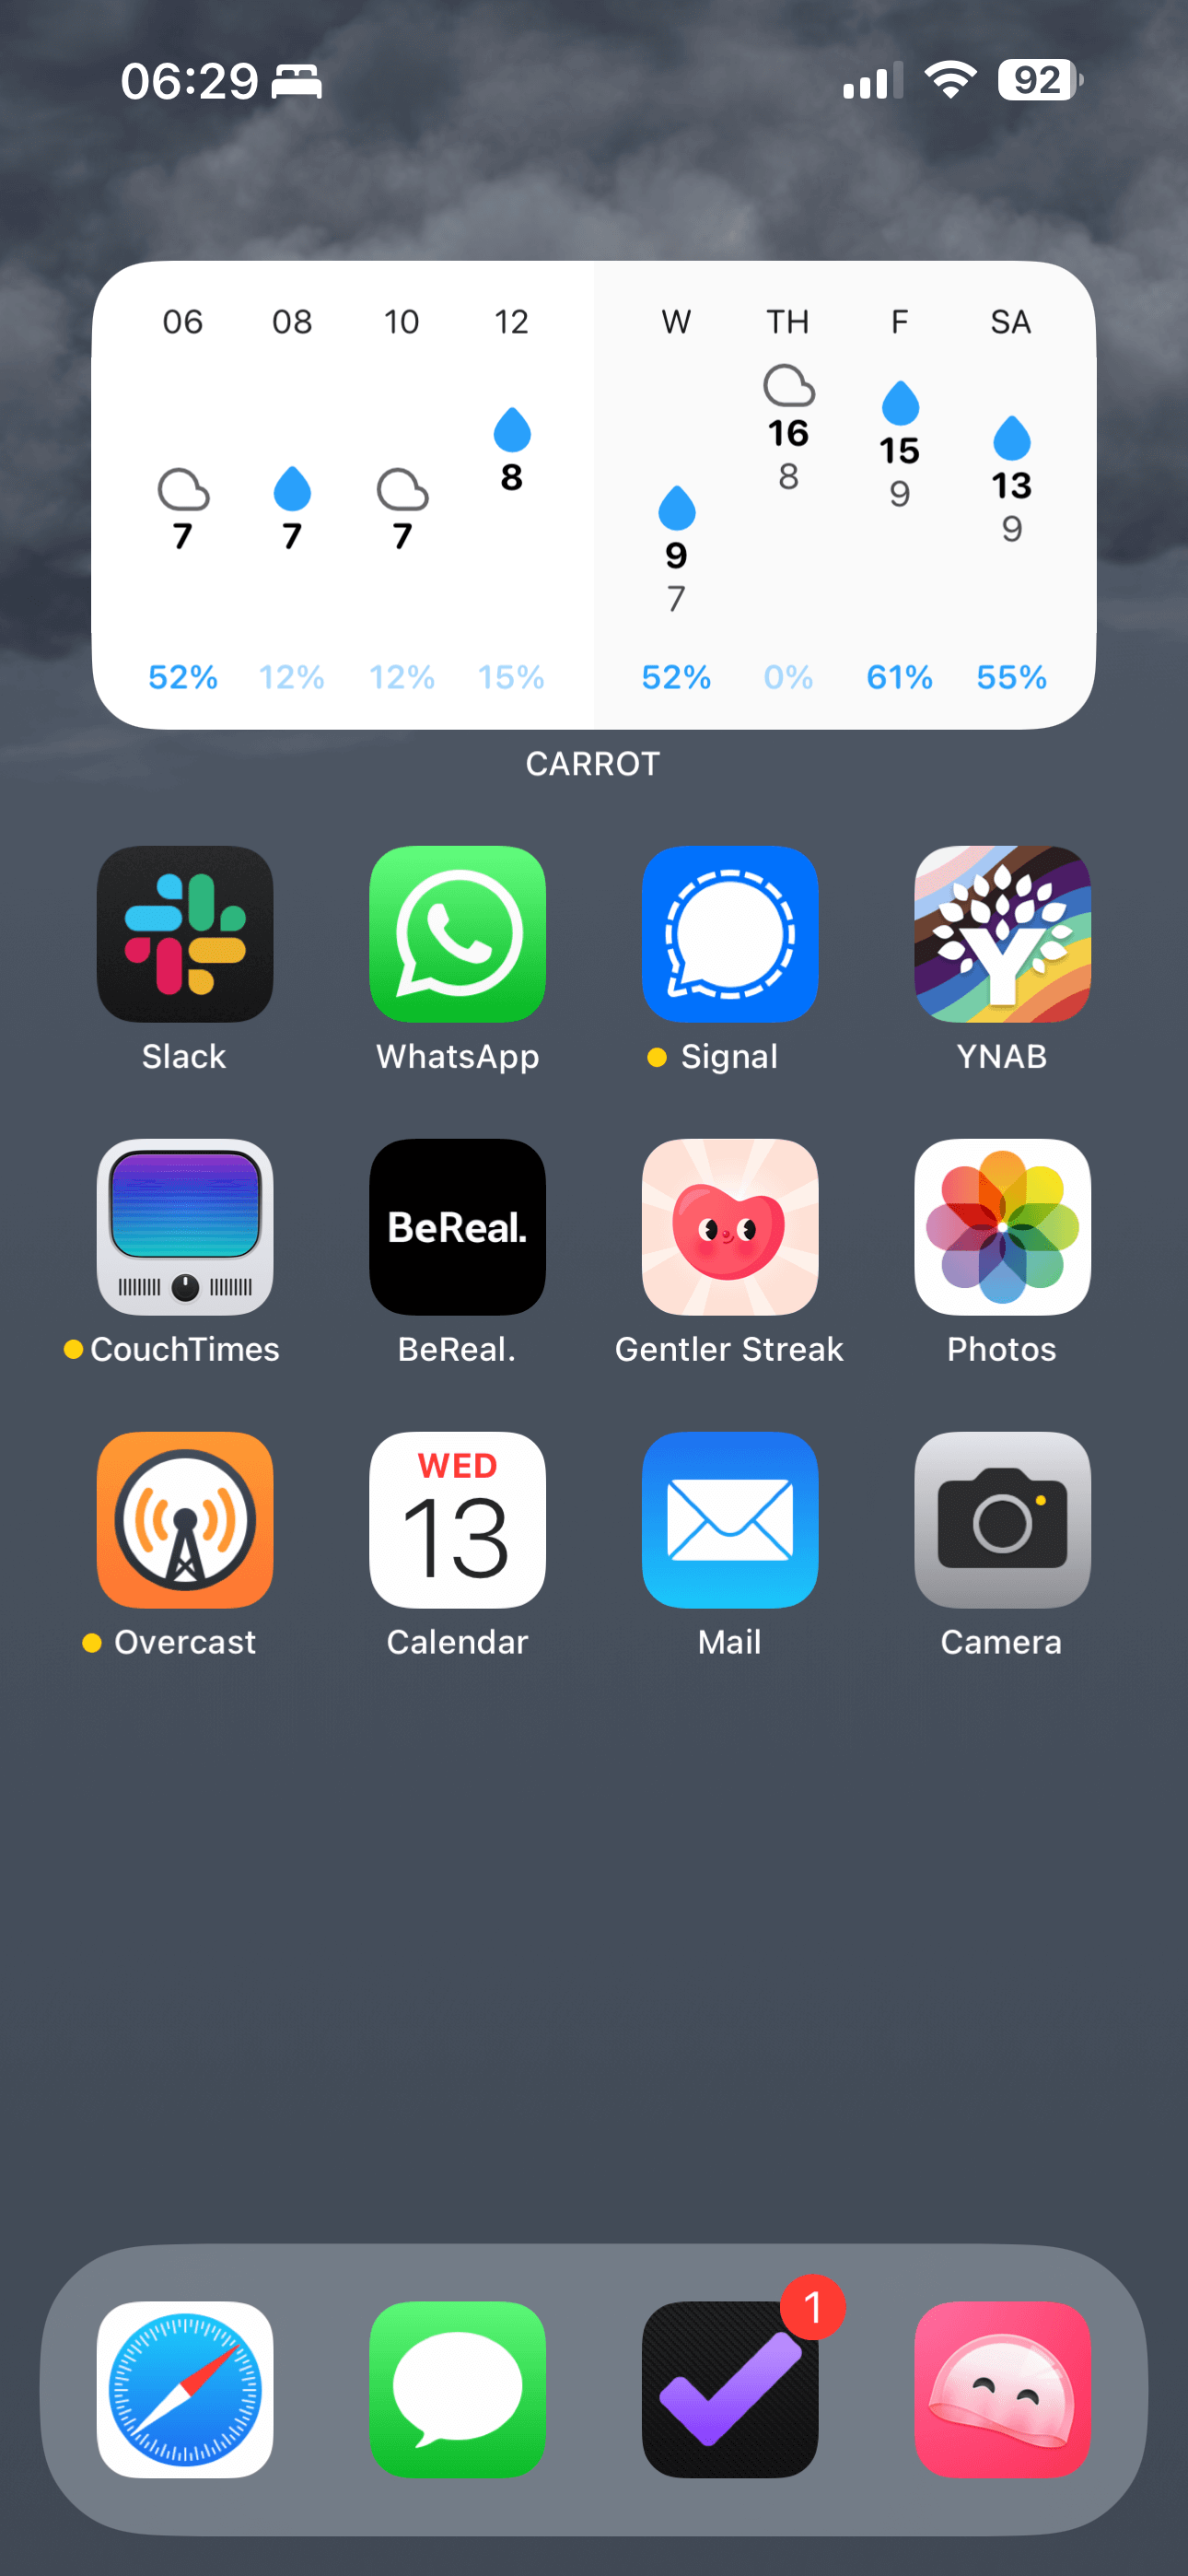 An iOS home screen with the weather background and a medium CARROT Weather widget at the top. After that comes three rows of apps: Slack, WhatsApp, Signal, YNAB, CouchTimes, BeReal, Gentler Streak, Photos, Overcast, Calendar, Mail, Camera. The Dock has four apps: Safari, Messages, OmniFocus and Manet.